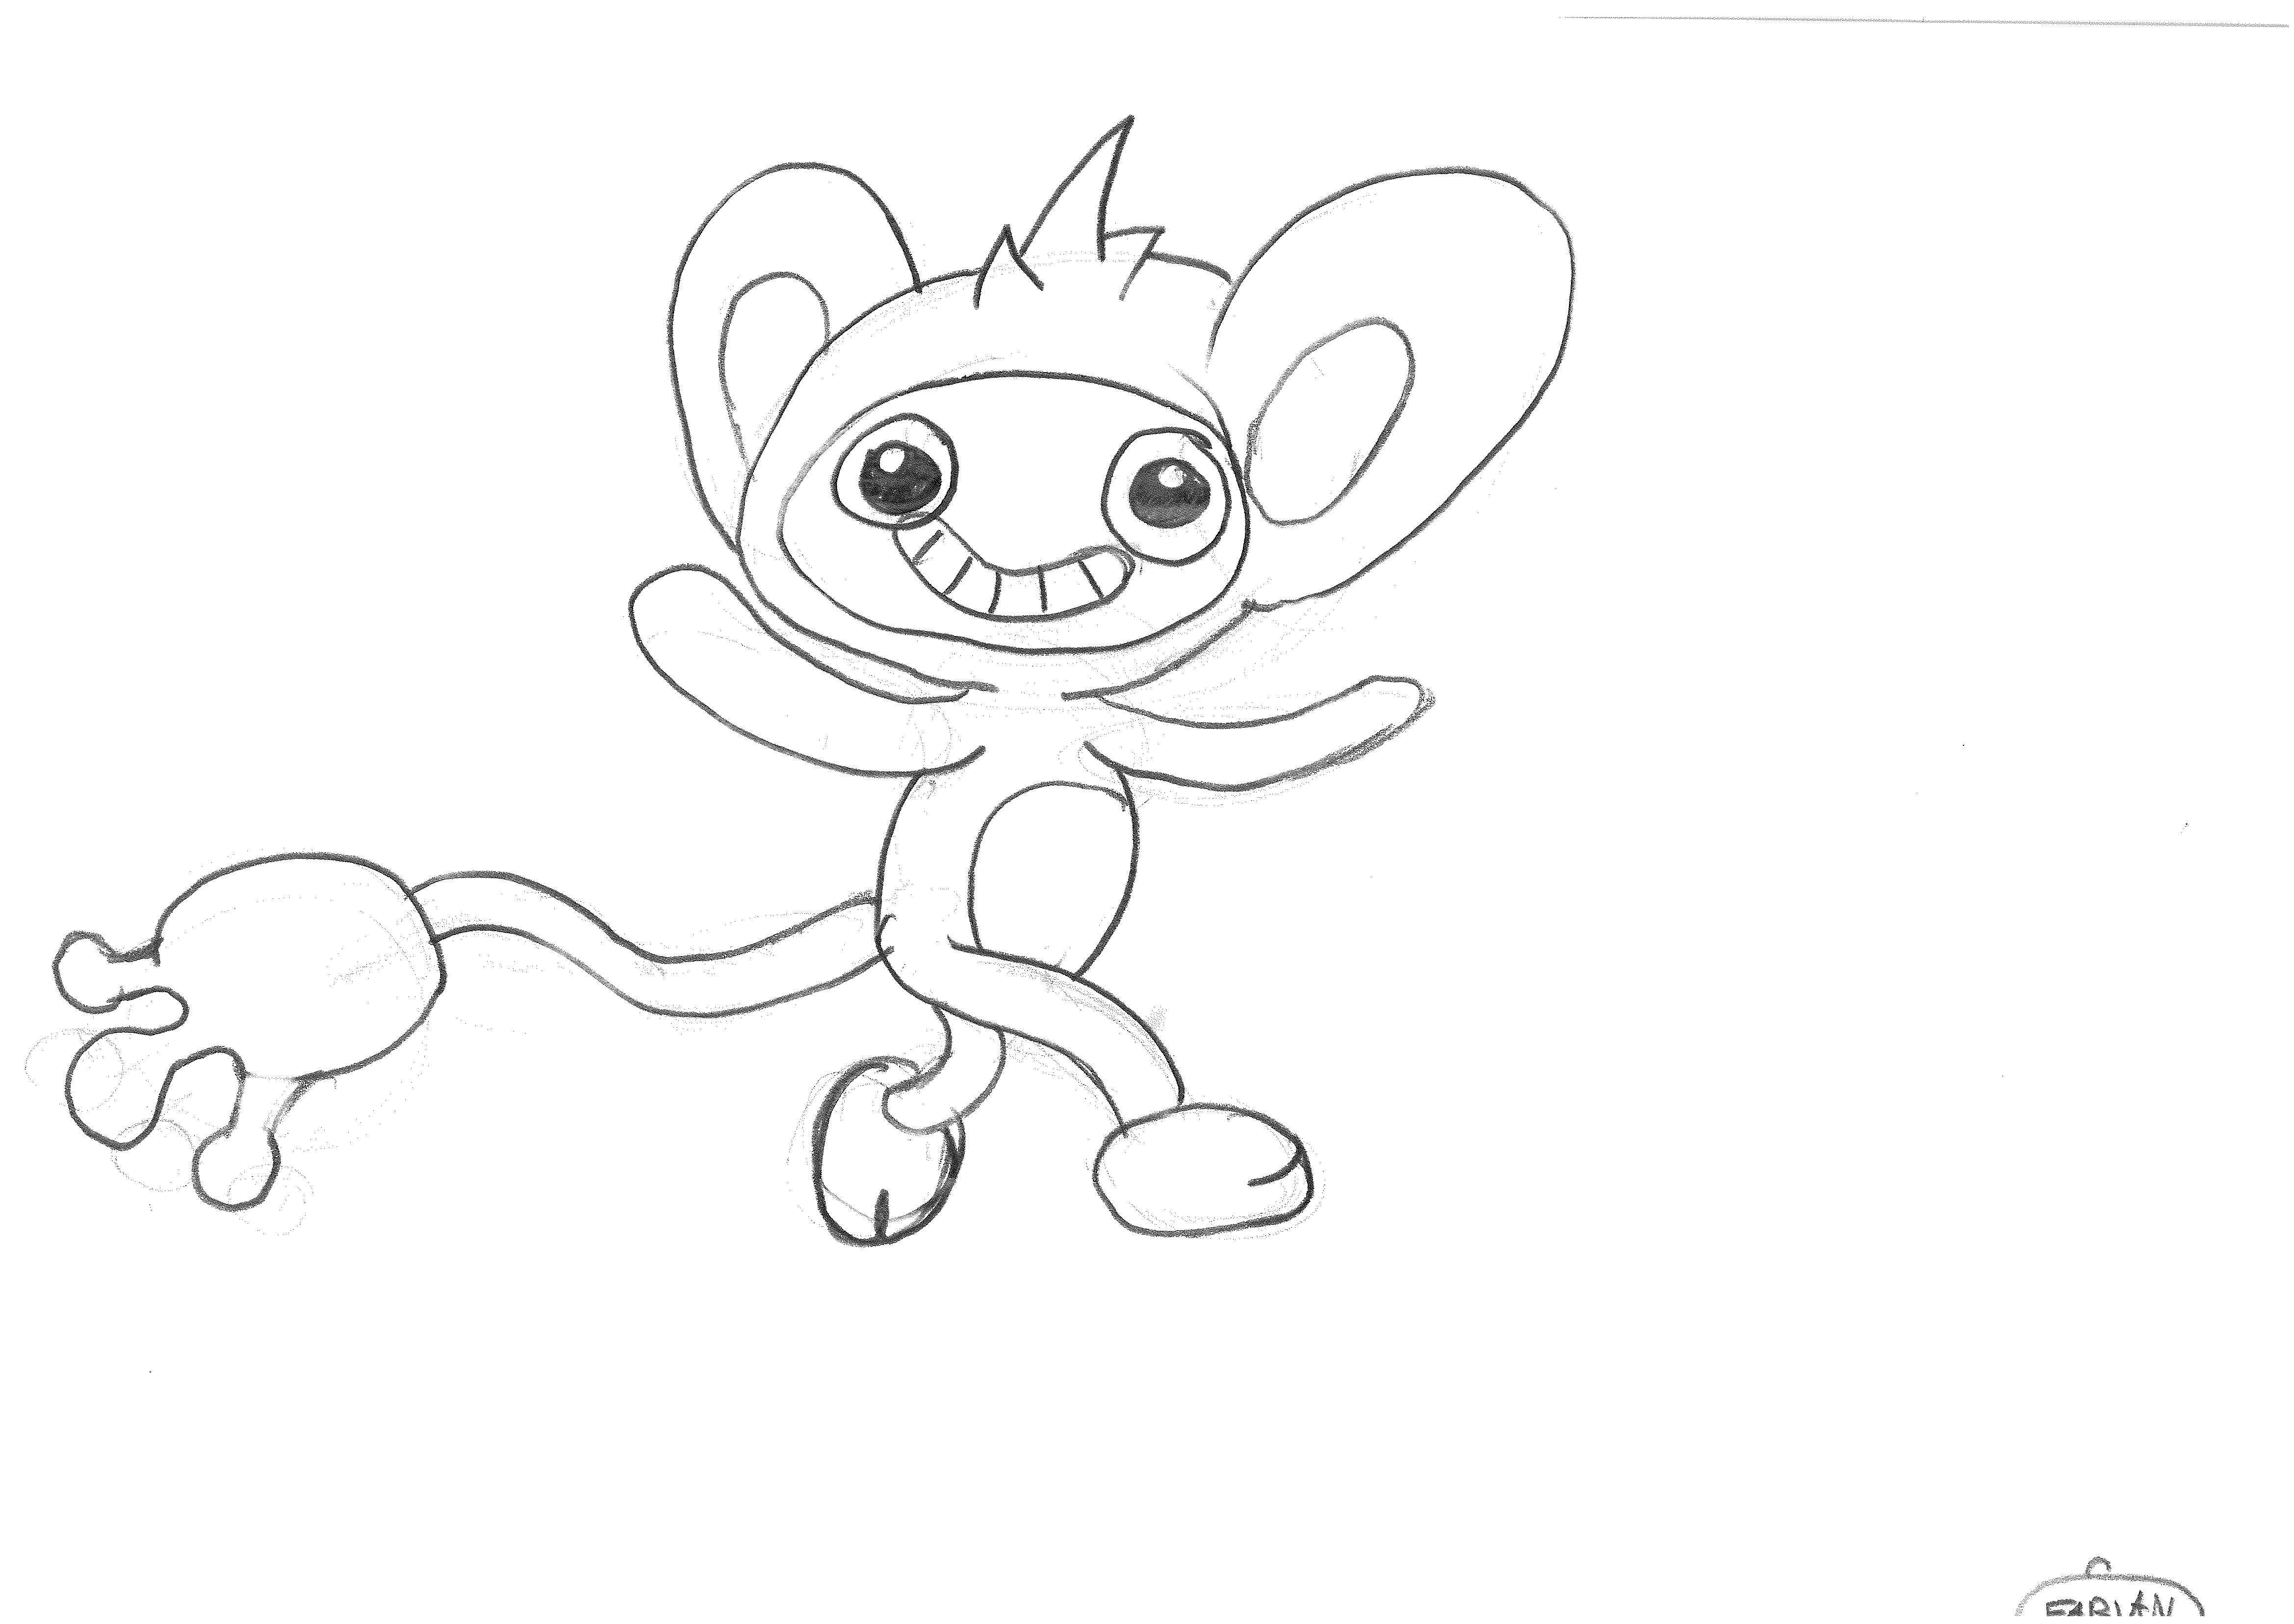 Aipom Coloring Pages